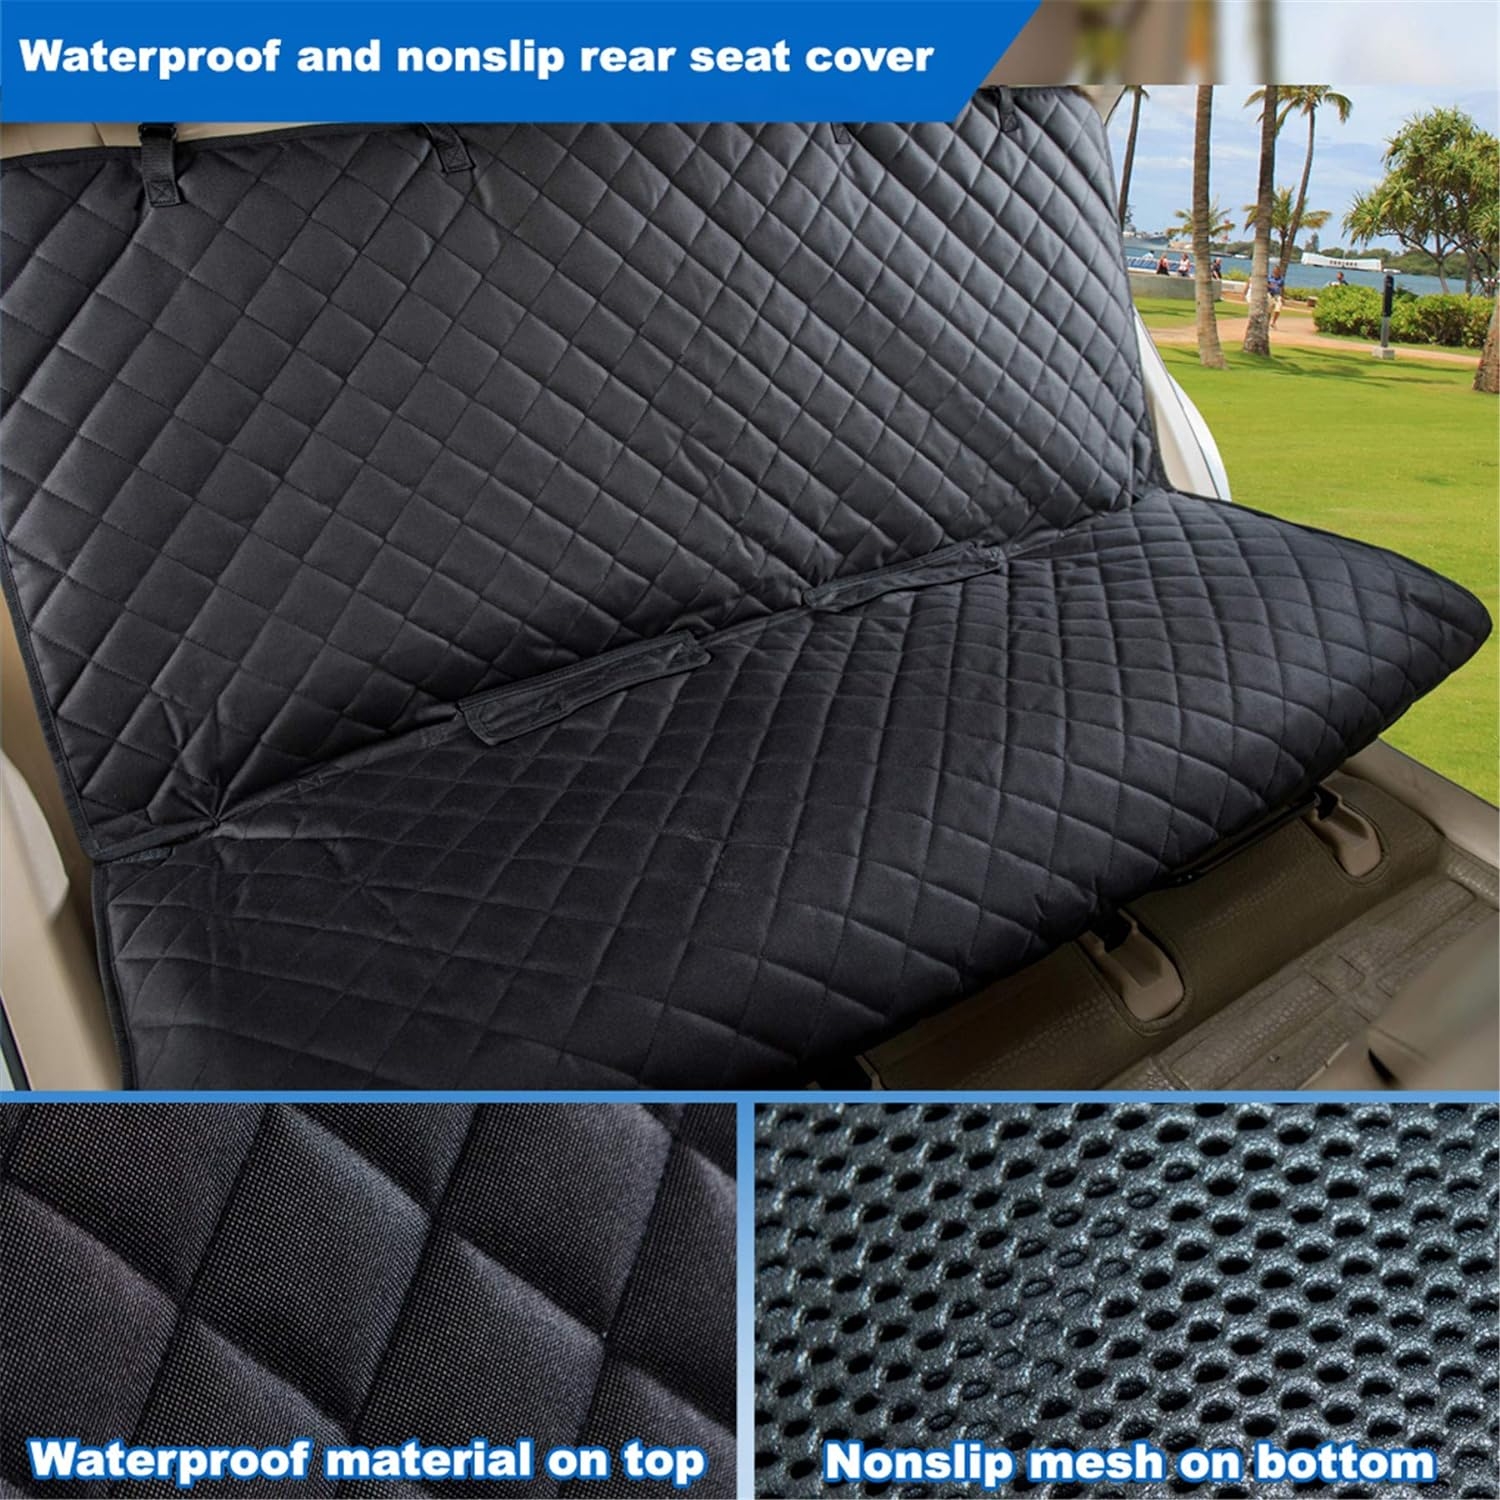 VIEWPETS Bench Car Seat Cover Protector - Waterproof, Heavy-Duty and Nonslip Pet Car Seat Cover for Dogs with Universal Size Fits for Cars, Trucks & SUVs